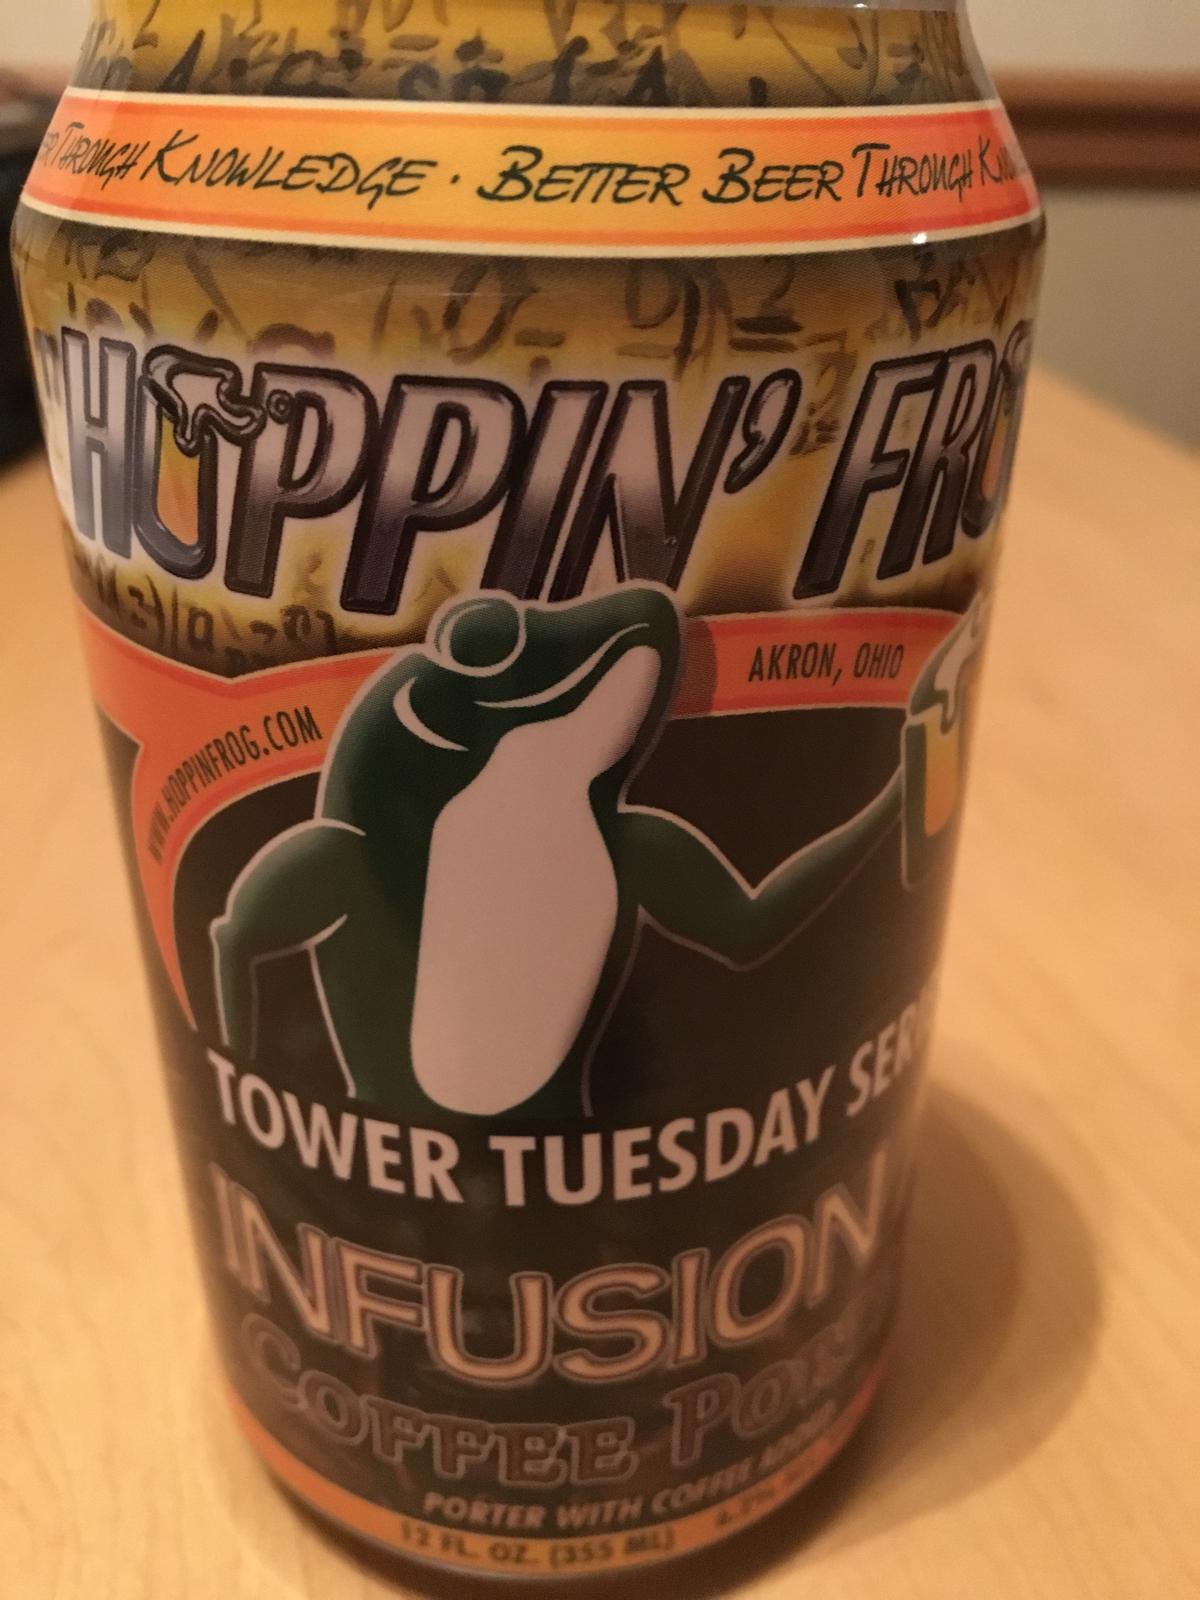 Tower Tuesday Series: Infusion A Coffee Porter